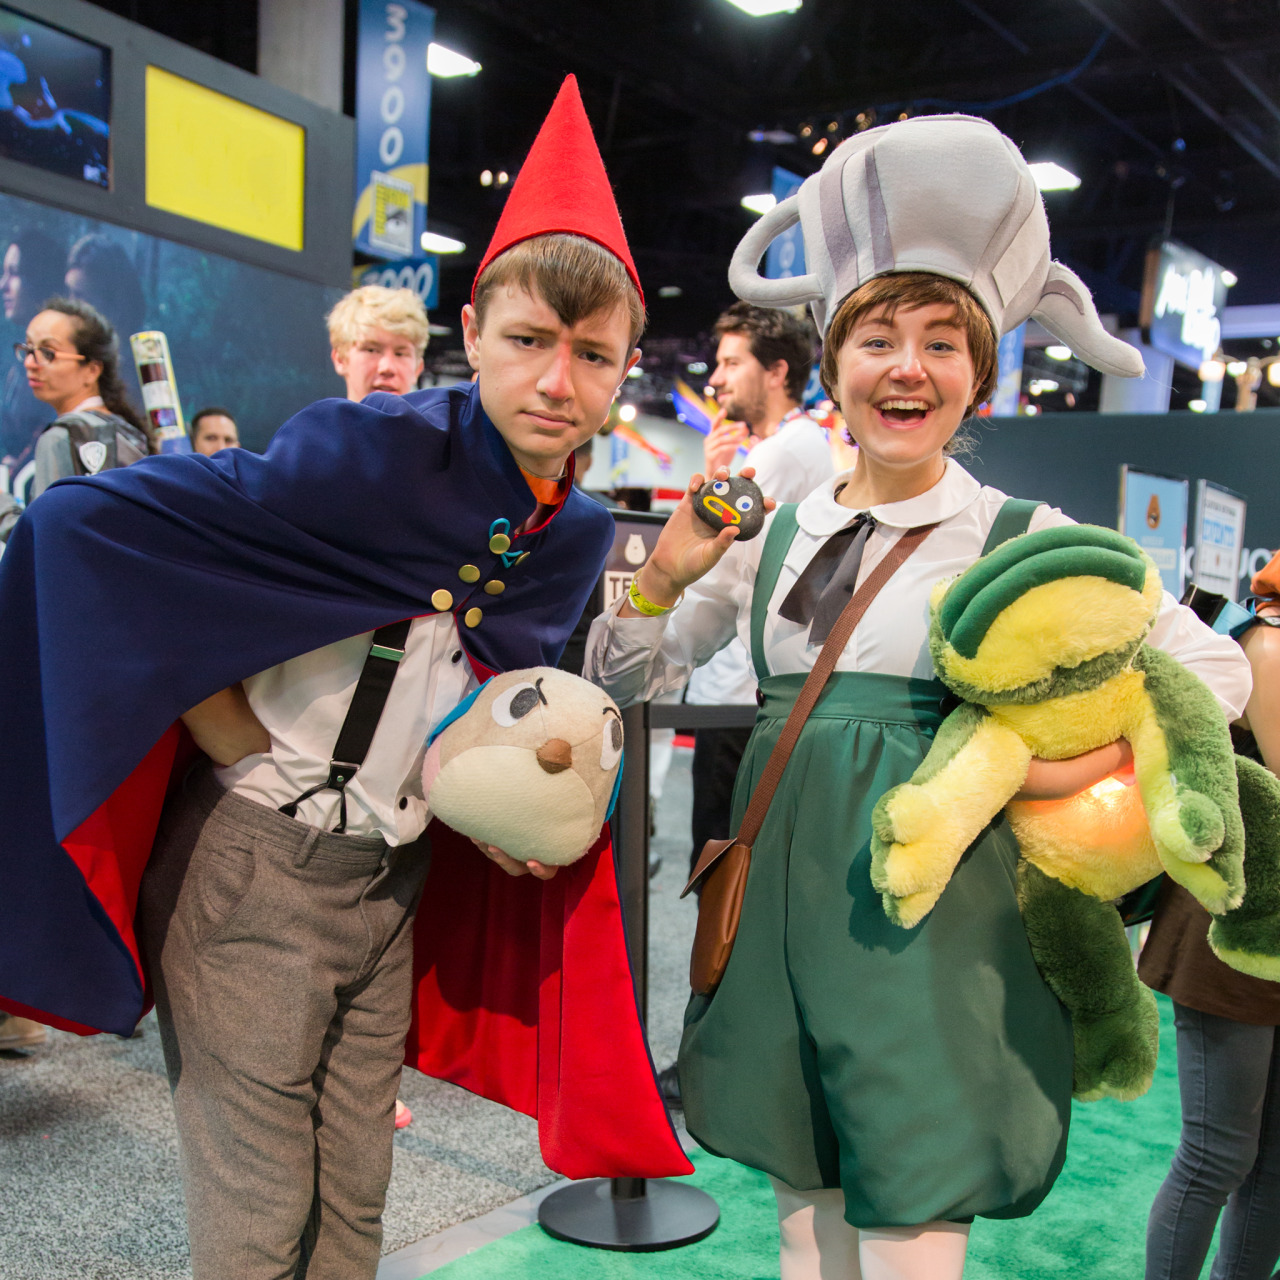 Cartoon Network — Wirt & Greg at ComicCon. Enter your costume in our...